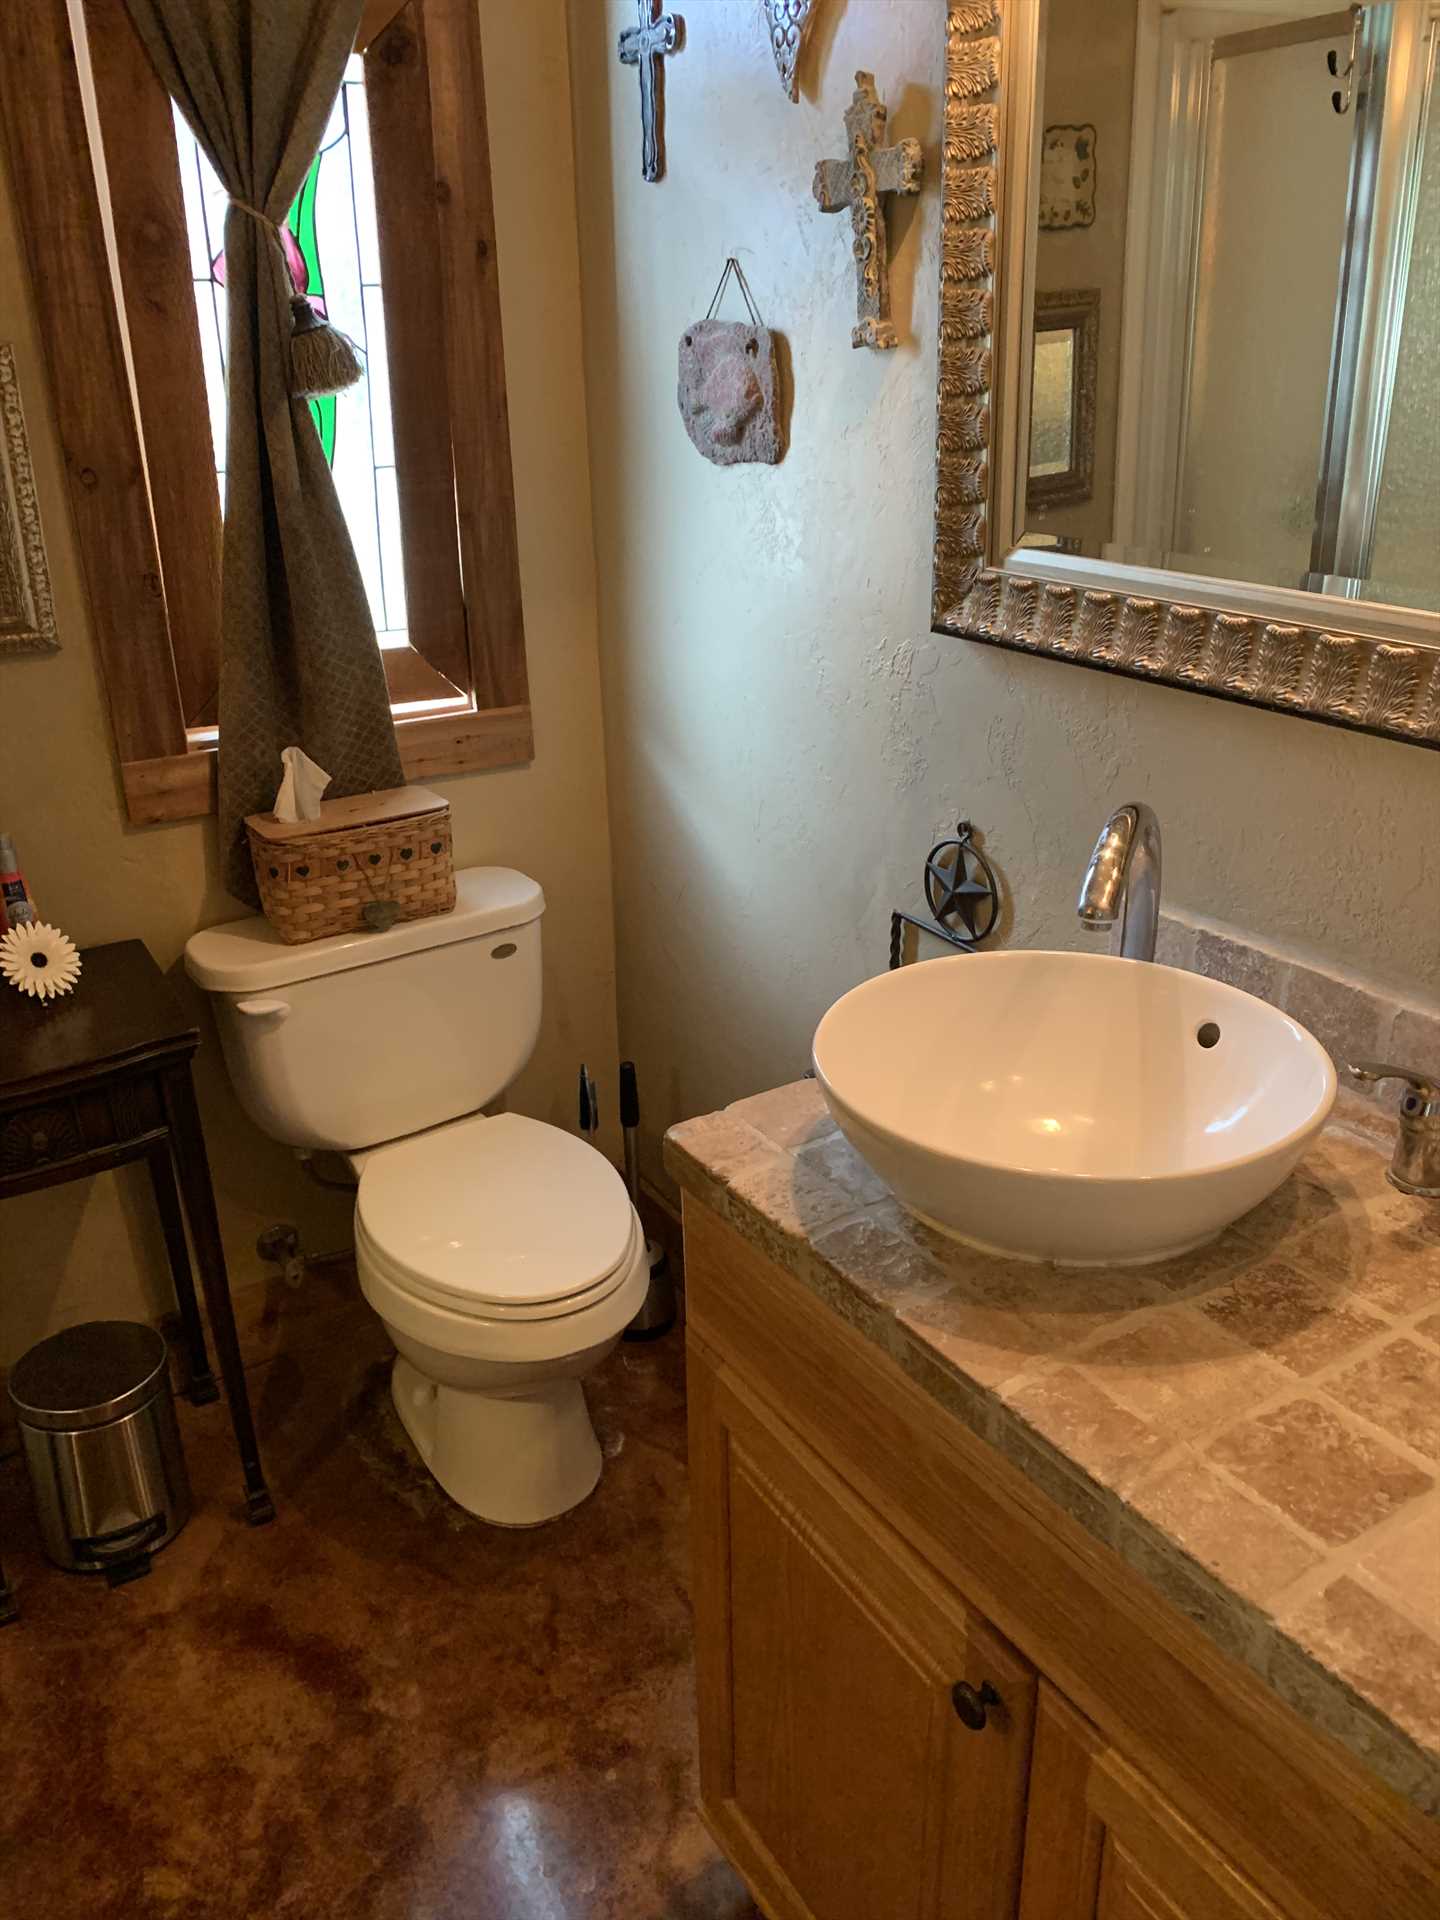                                                 Check out the unique bowl-style vanity! All bed and bath linens are included as part of your stay at the Casita.